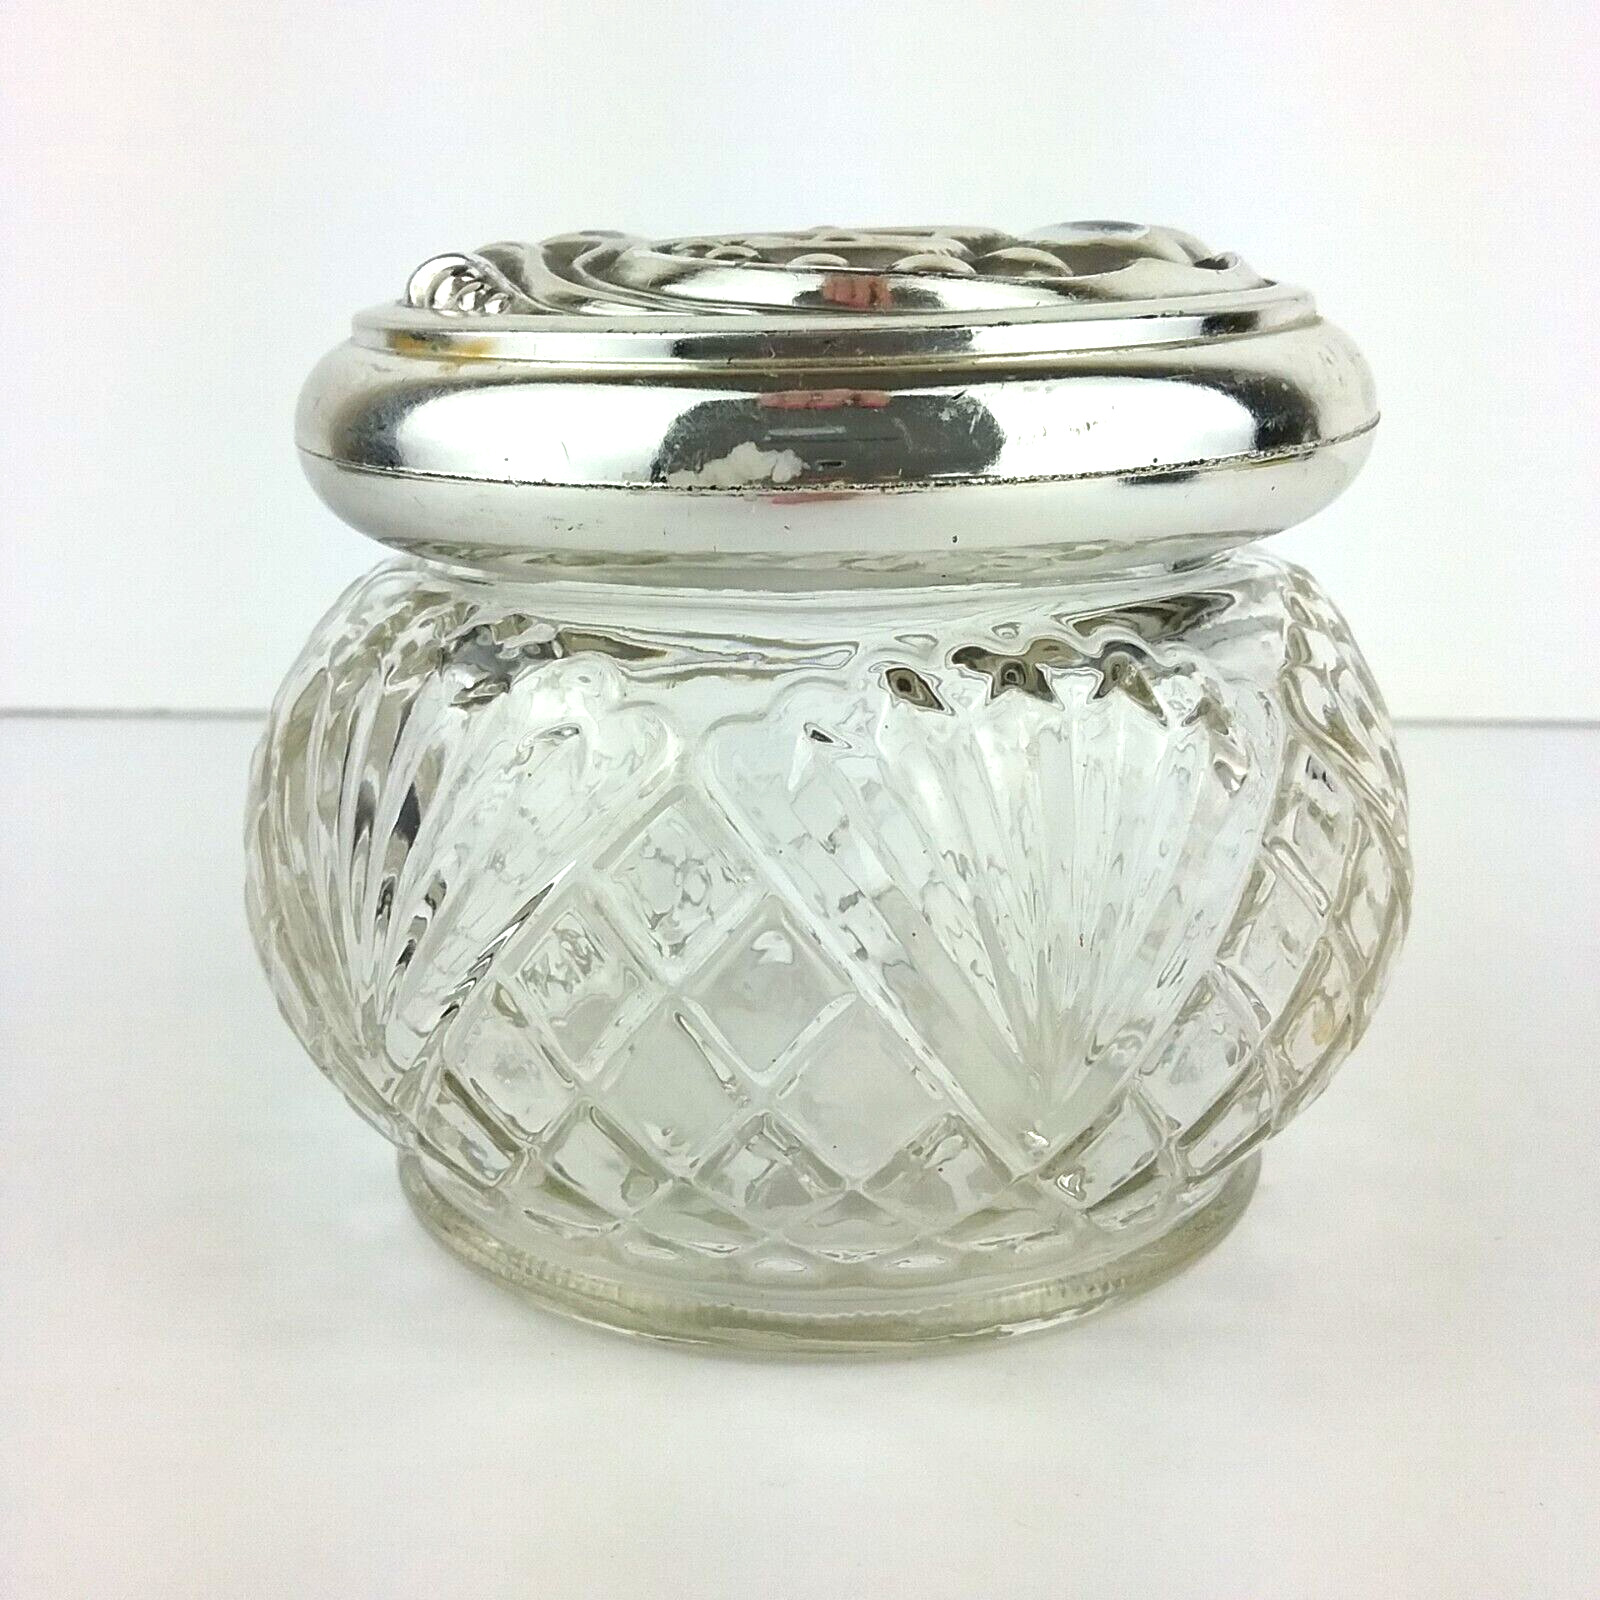 Avon Moisture Cream Jar Silver Tone Embossed Lid,  EMPTY Clear Vintage Container